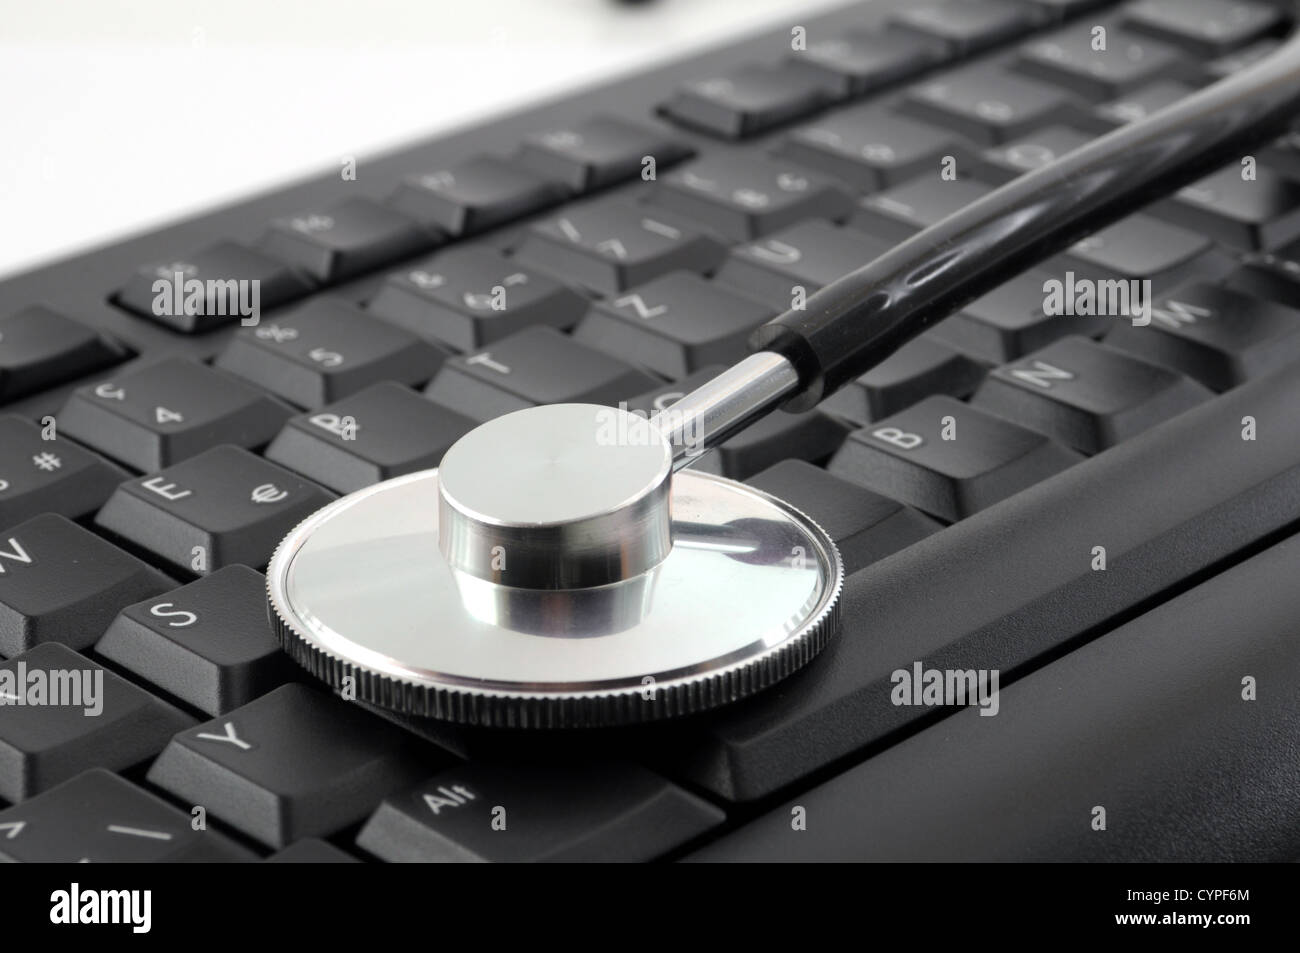 stethoscope on computer keyboard showing medical or pc support concept Stock Photo